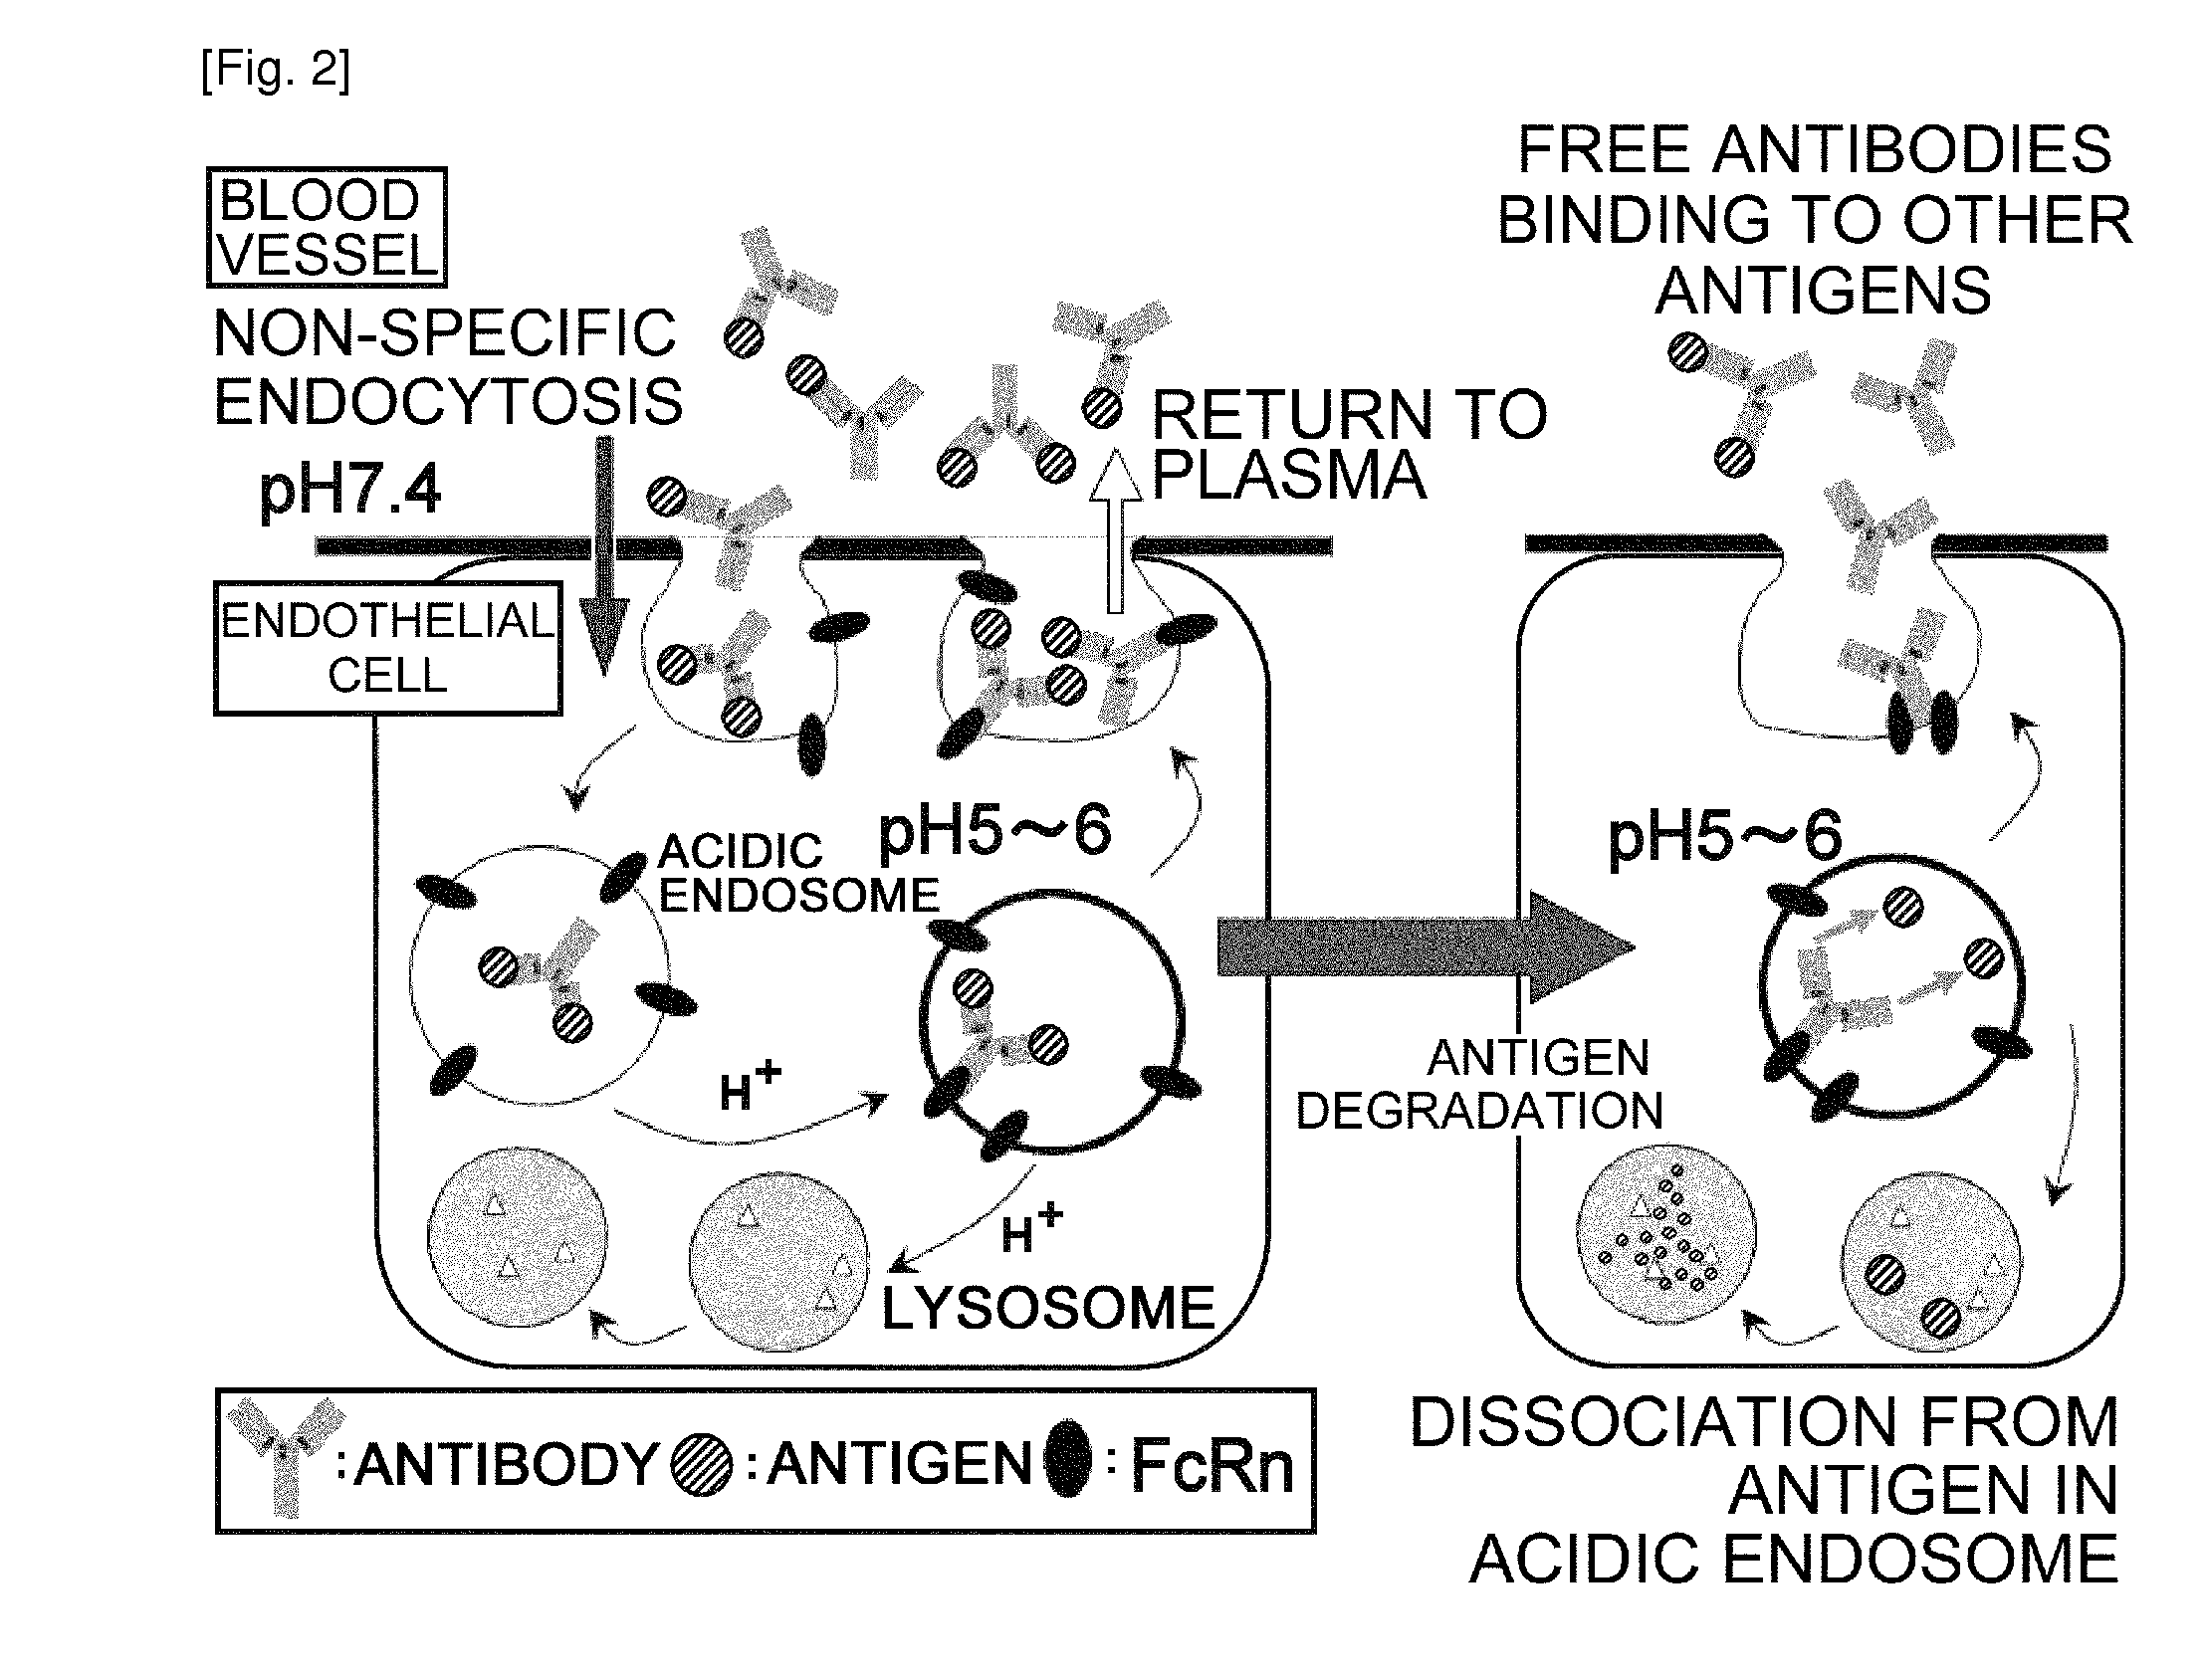 Antibodies with modified affinity to fcrn that promote antigen clearance